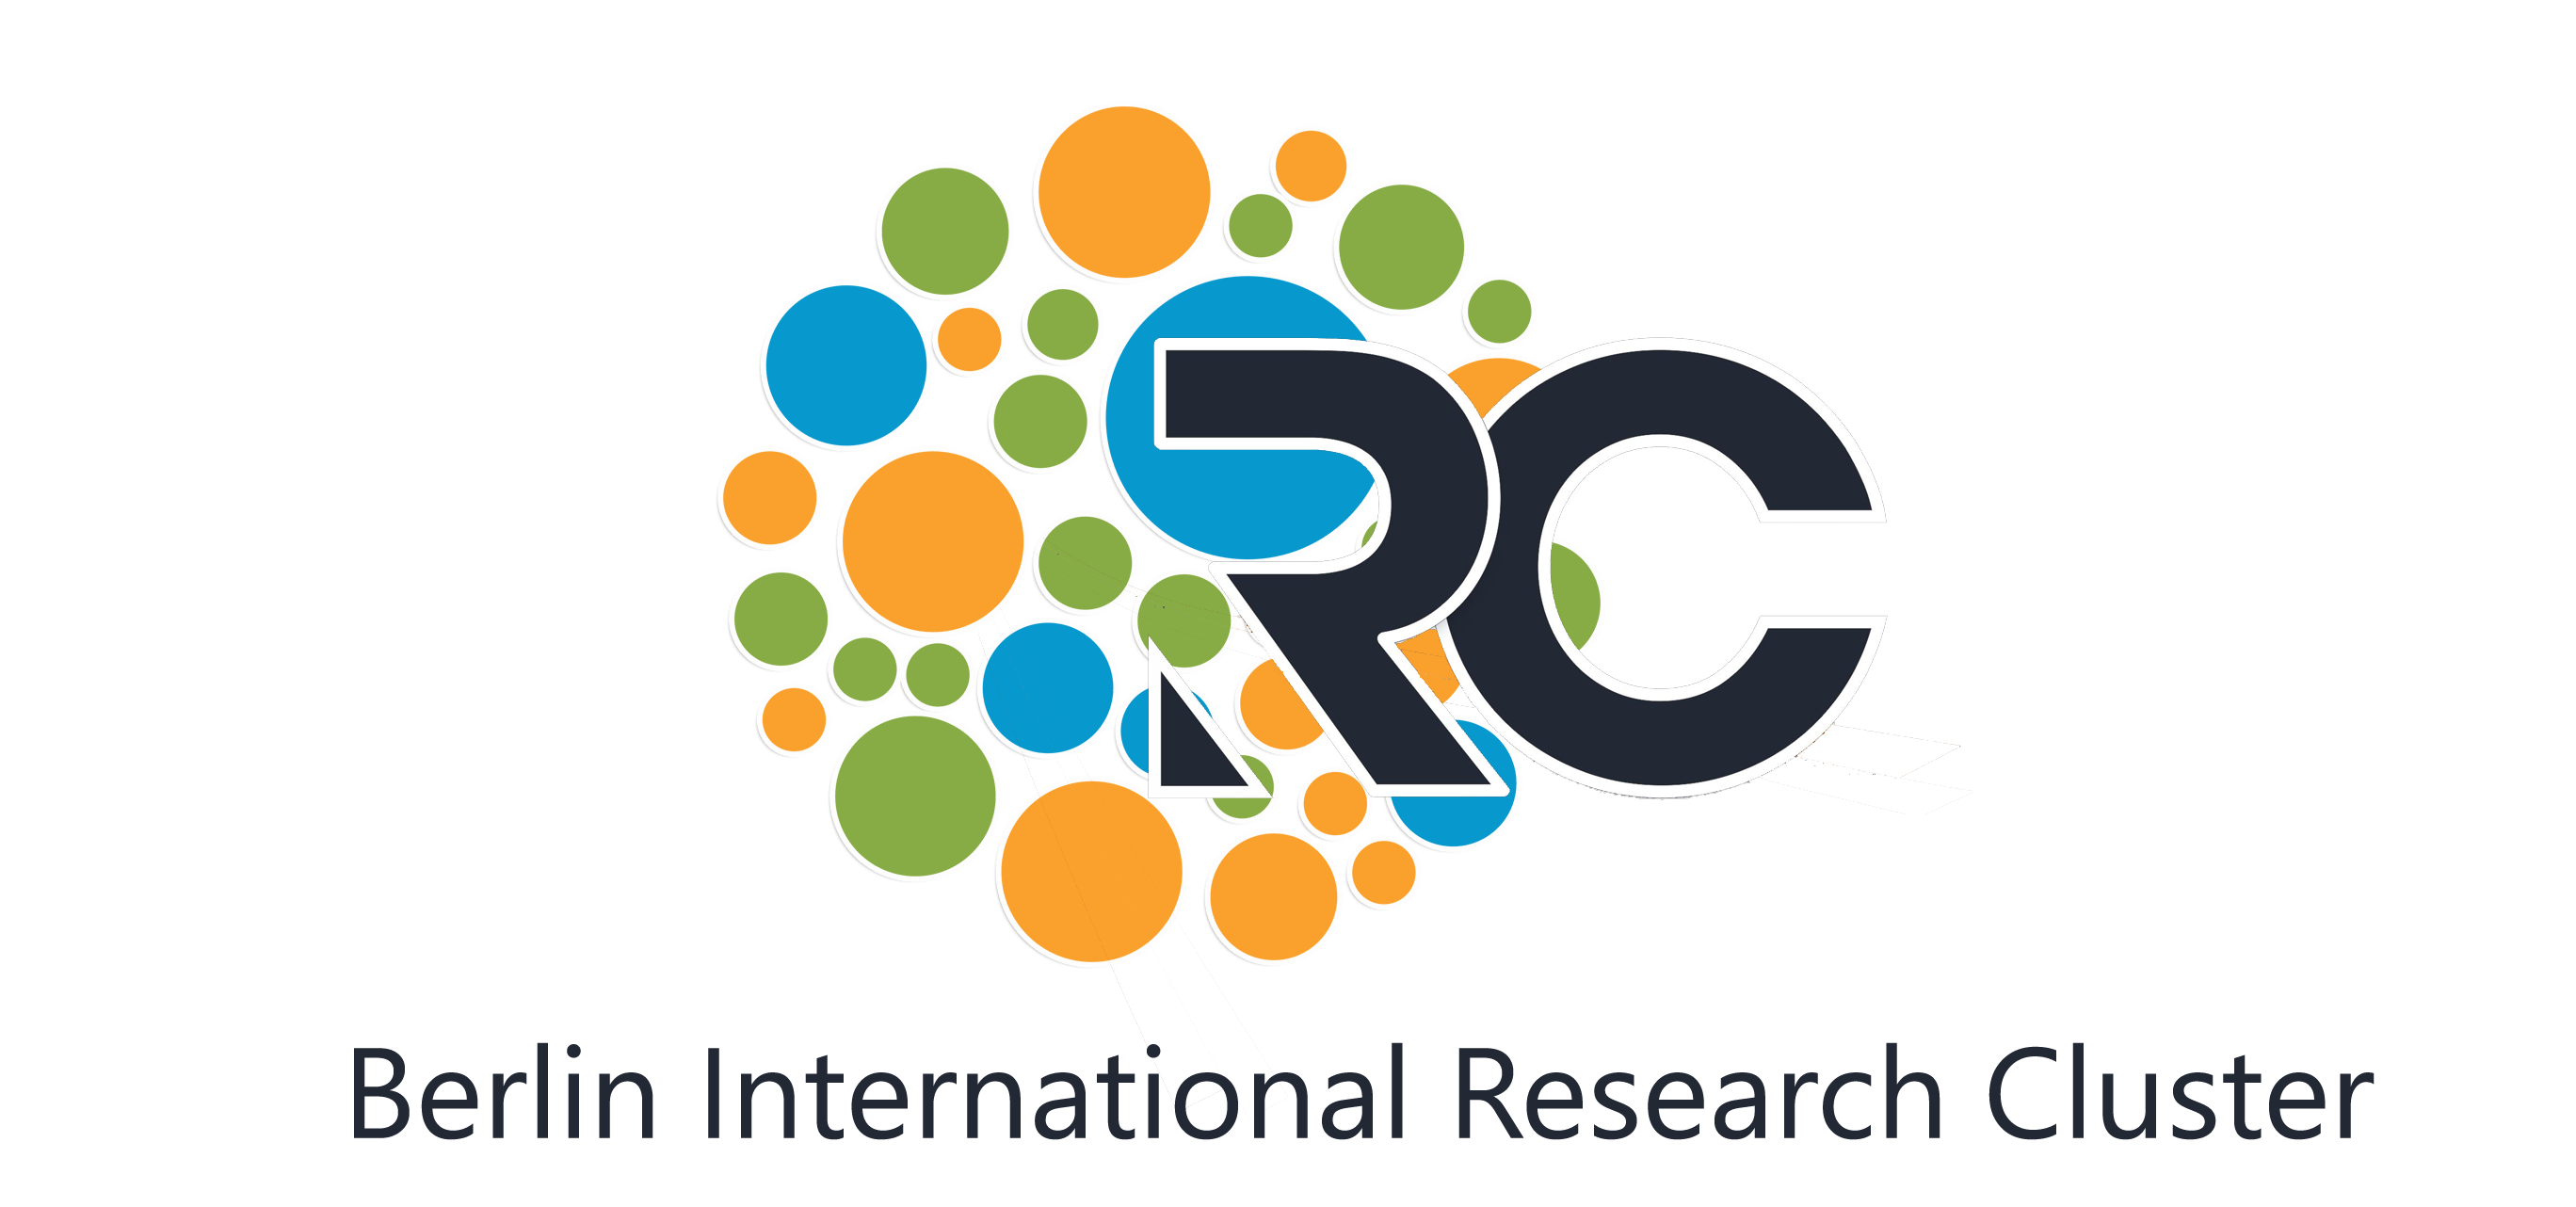 4th International Conference on Economic Impact of Entrepreneurship and Social Science Research on Society. EESR Singapore, Singapore